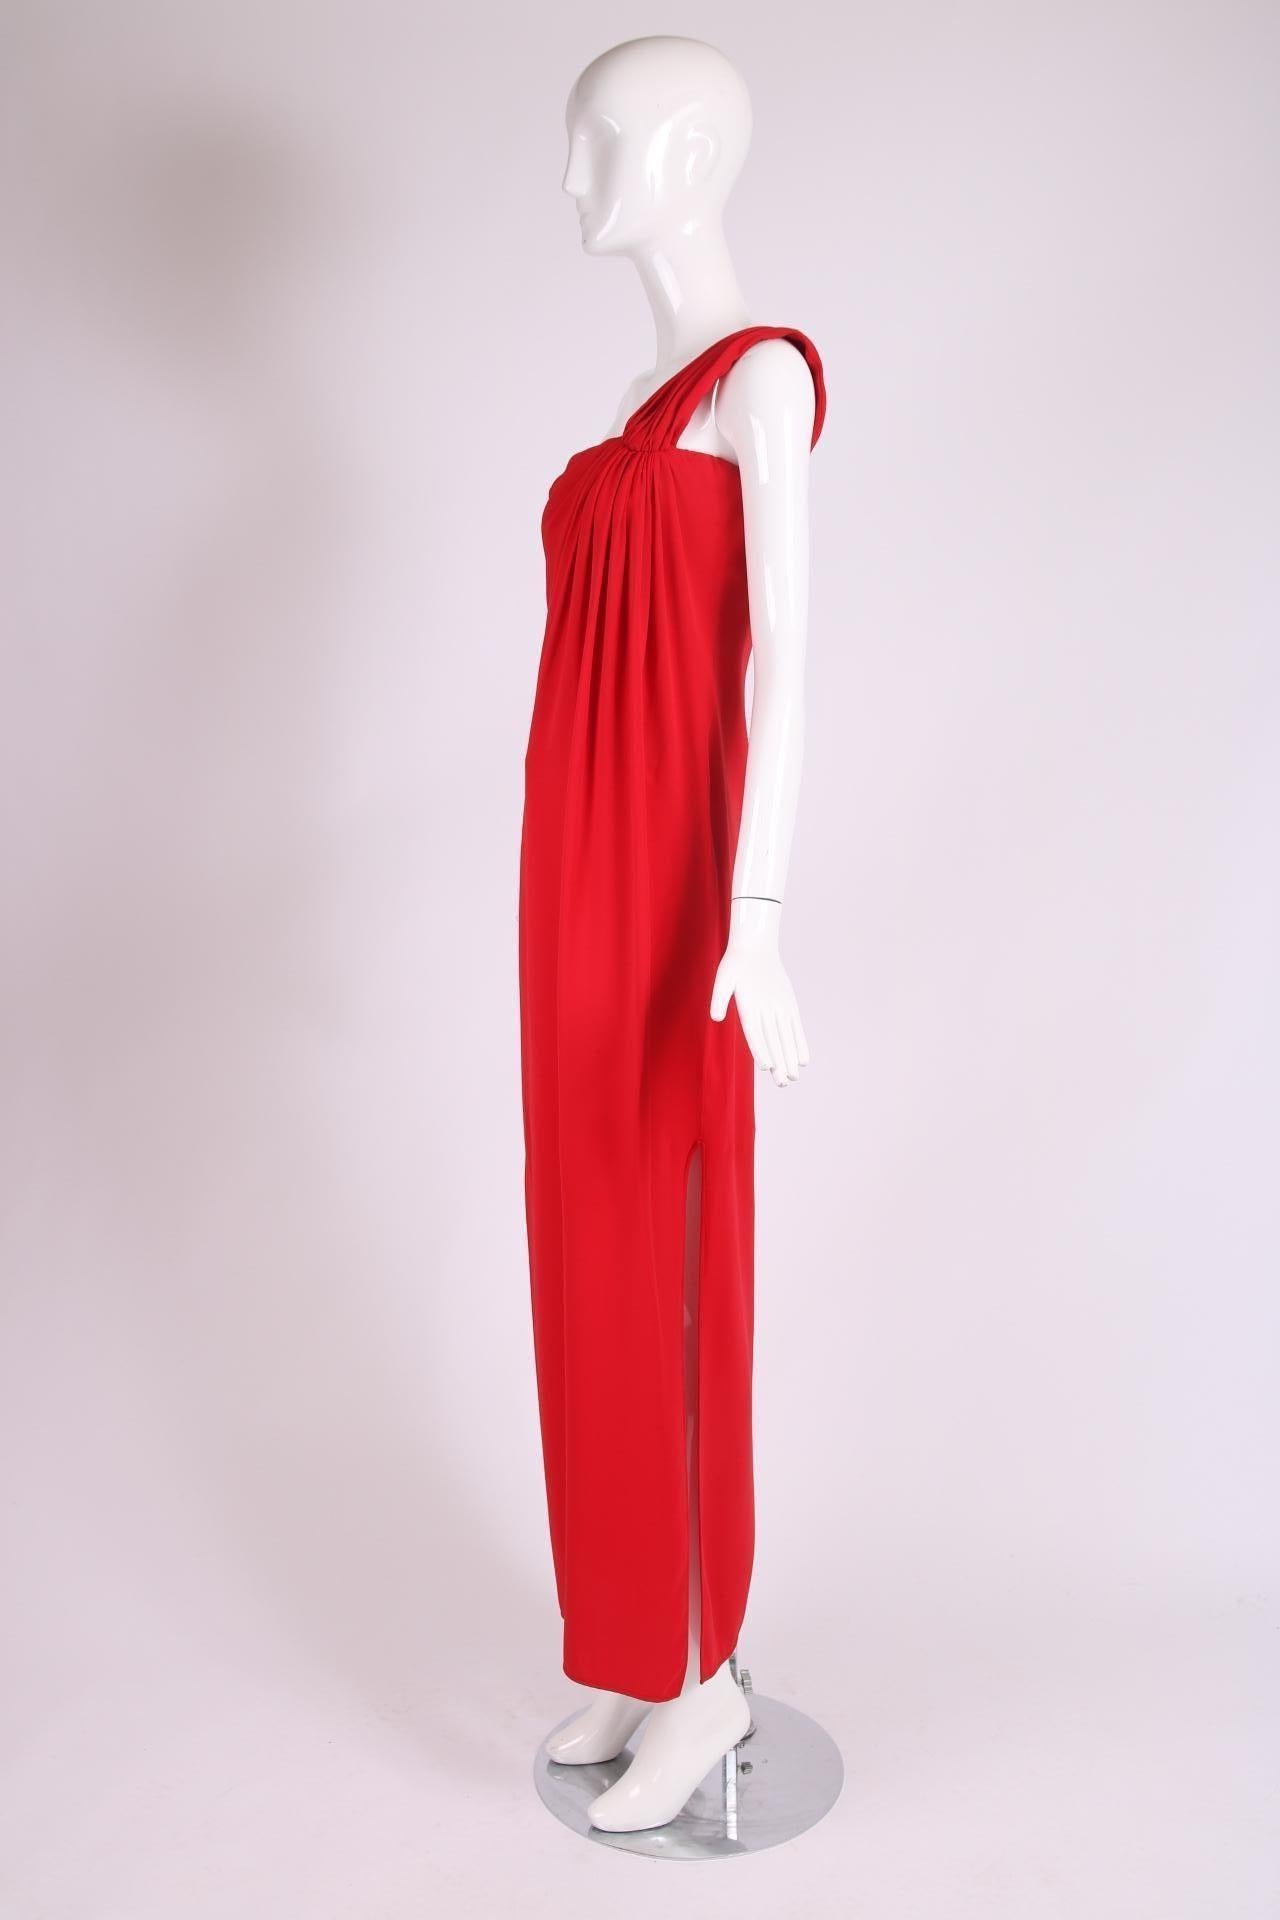 Valentino haute couture red silk single shoulder column gown with high side slit. Features an interior corset with boning which fastens at the side via hook and eye closures with a hidden side seam zipper on top. In very good condition with a small